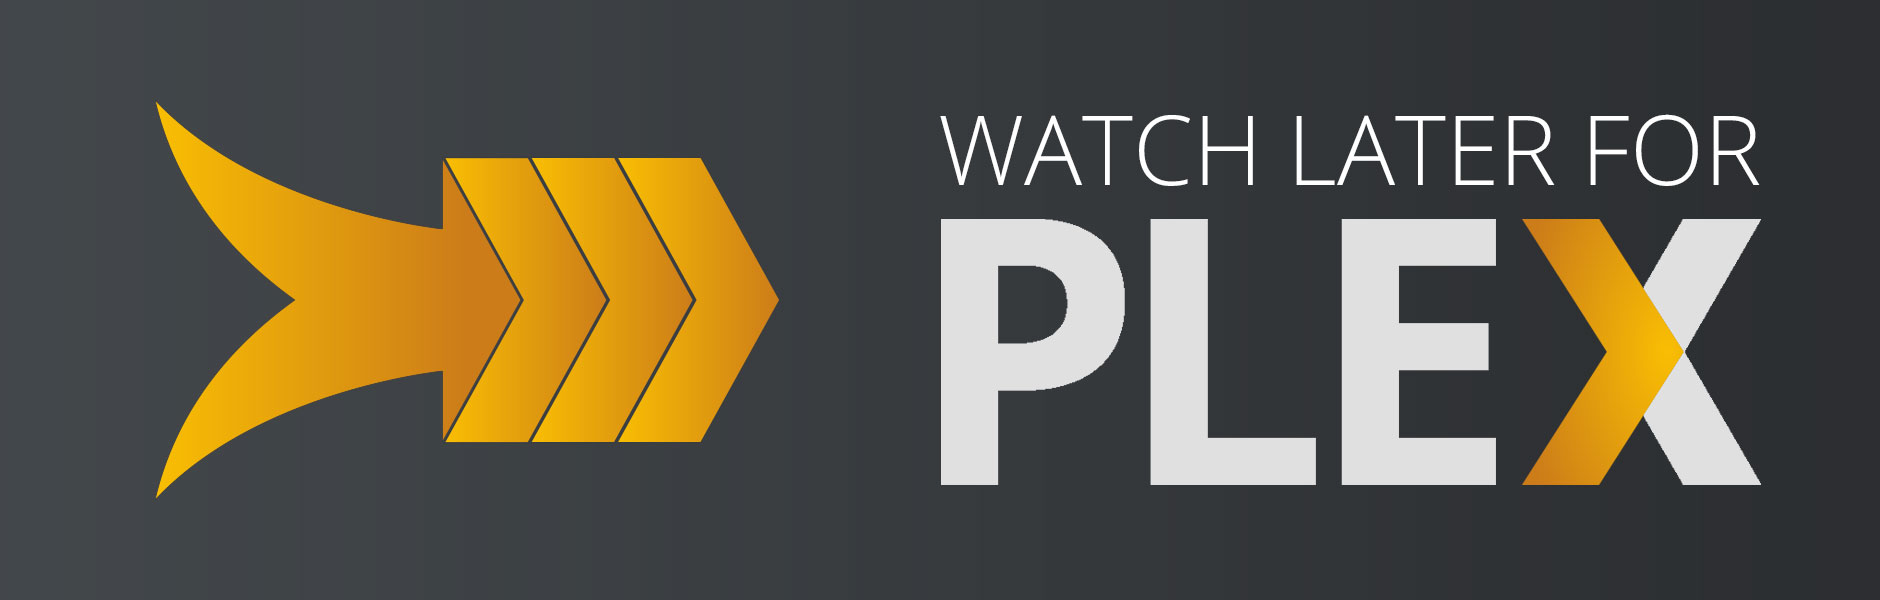 Watch Later for Plex